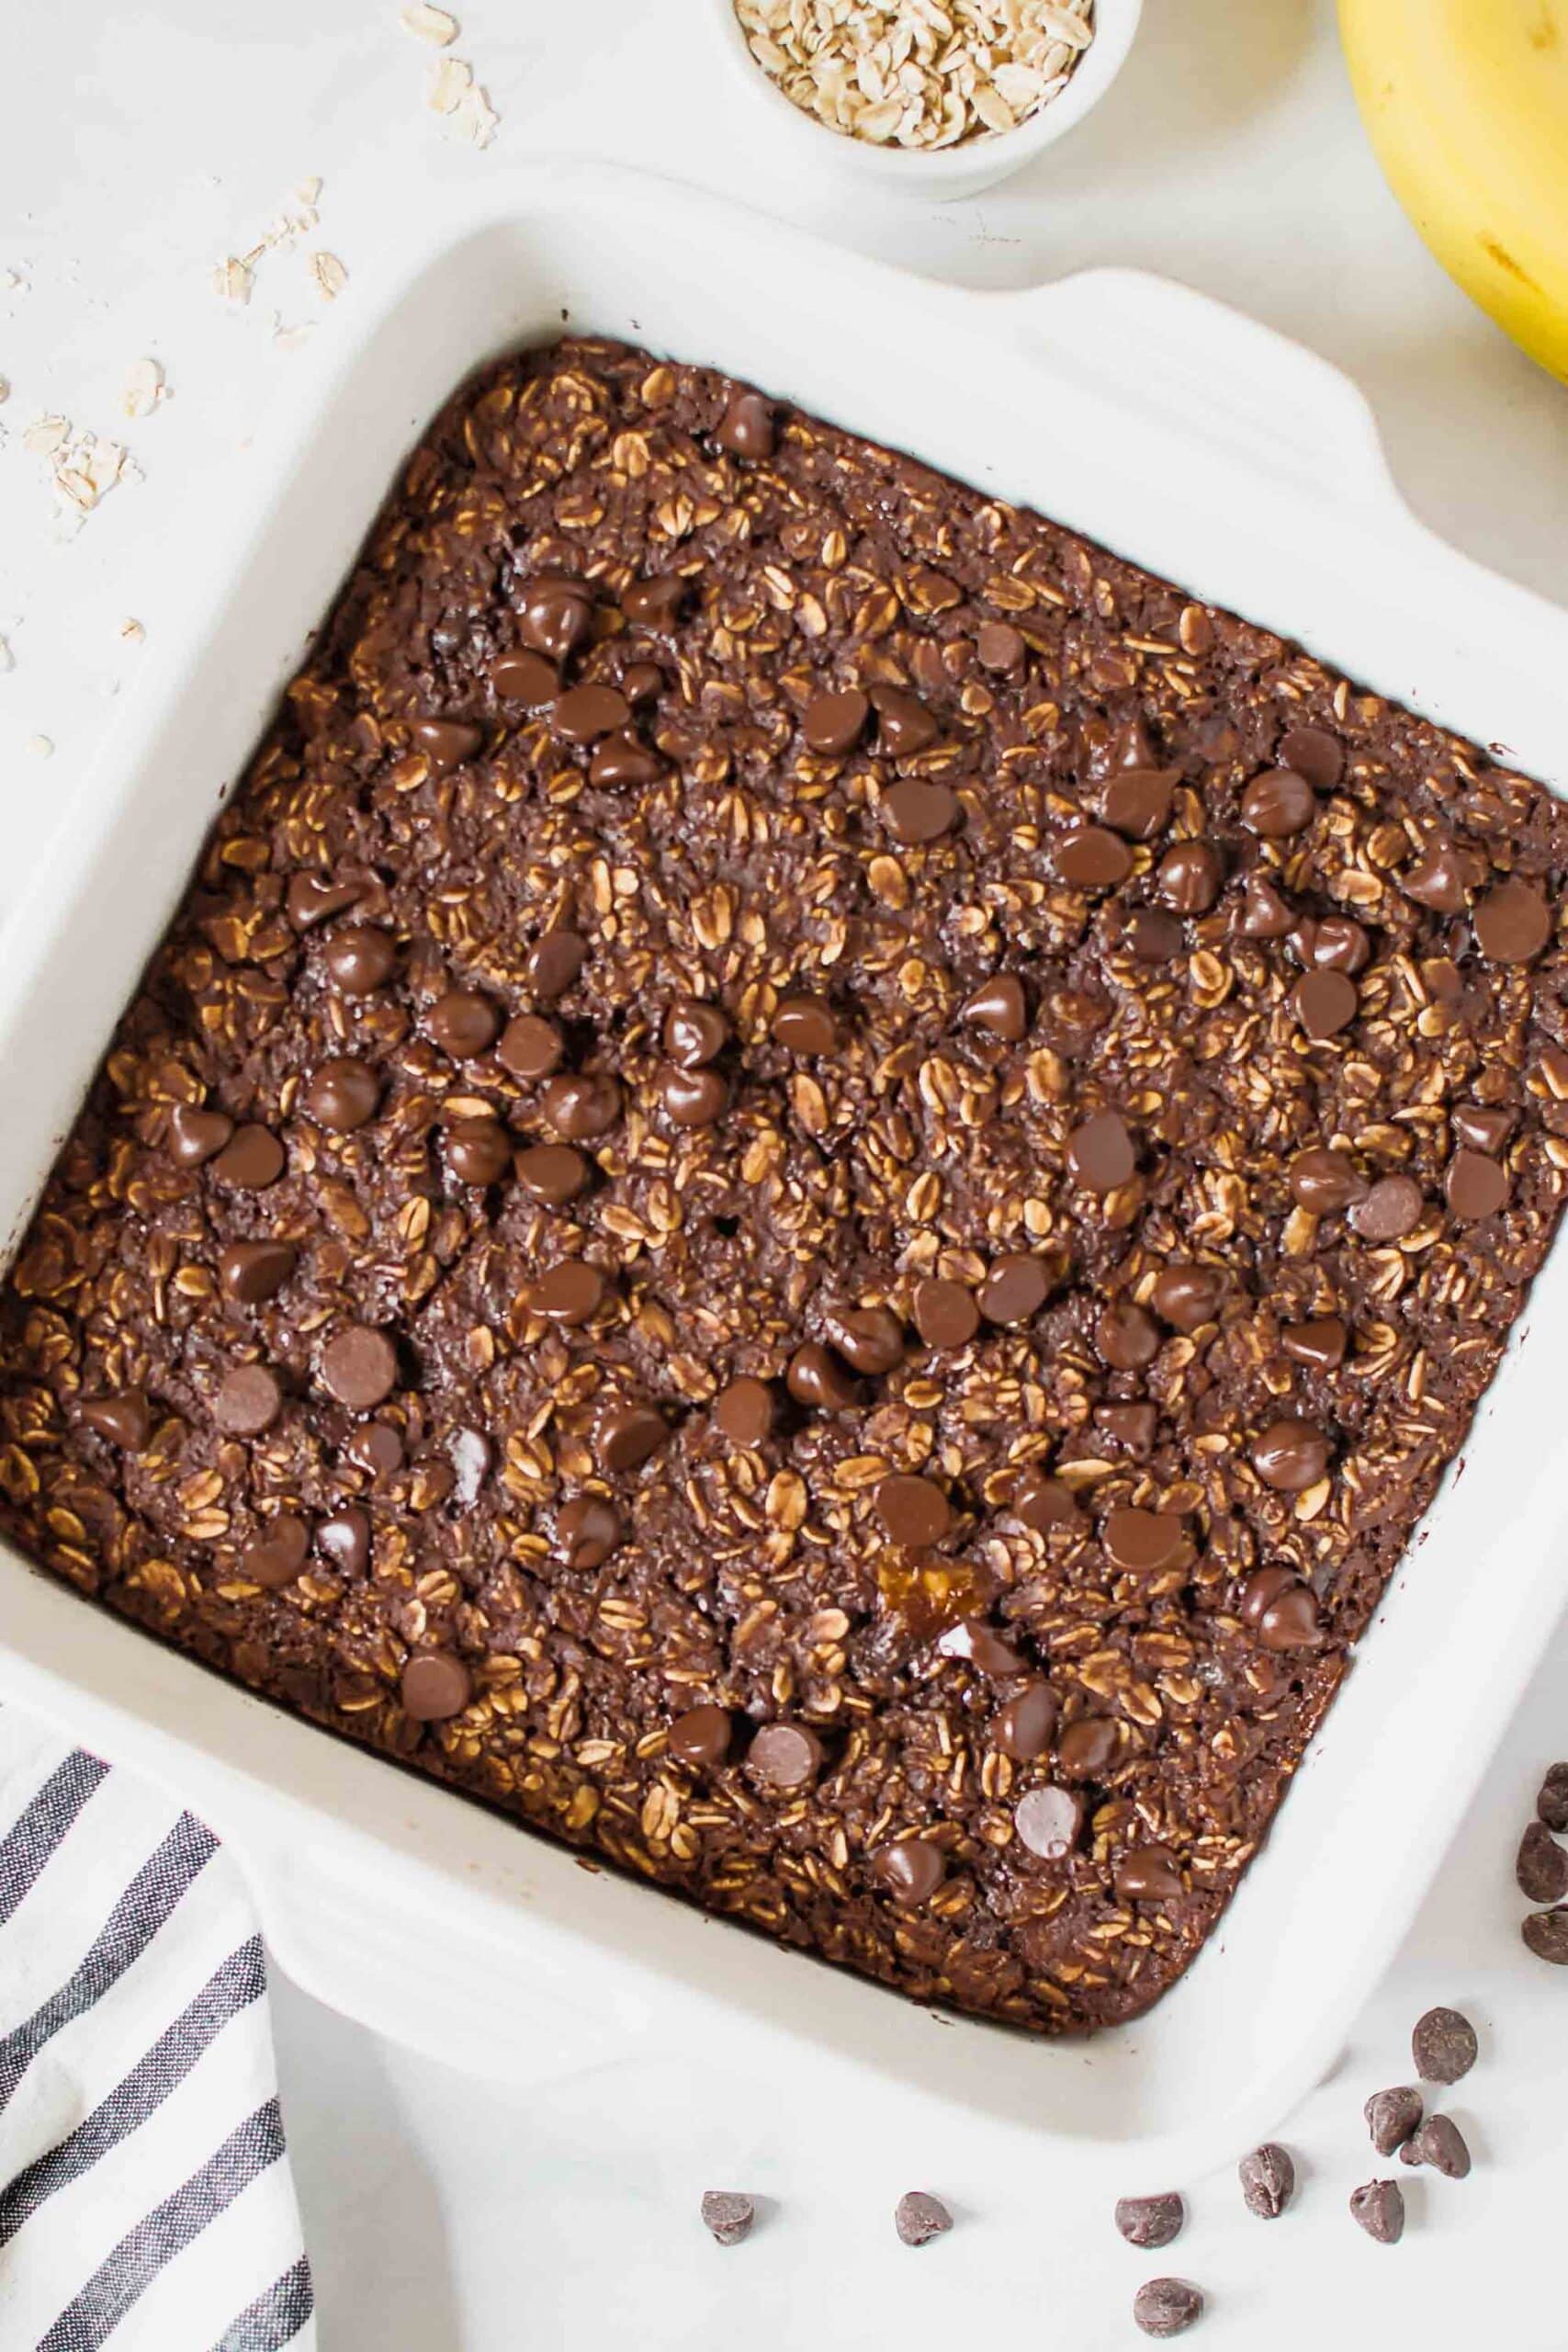 Chocolate Baked Oats in a white baking dish topped with chocolate chips